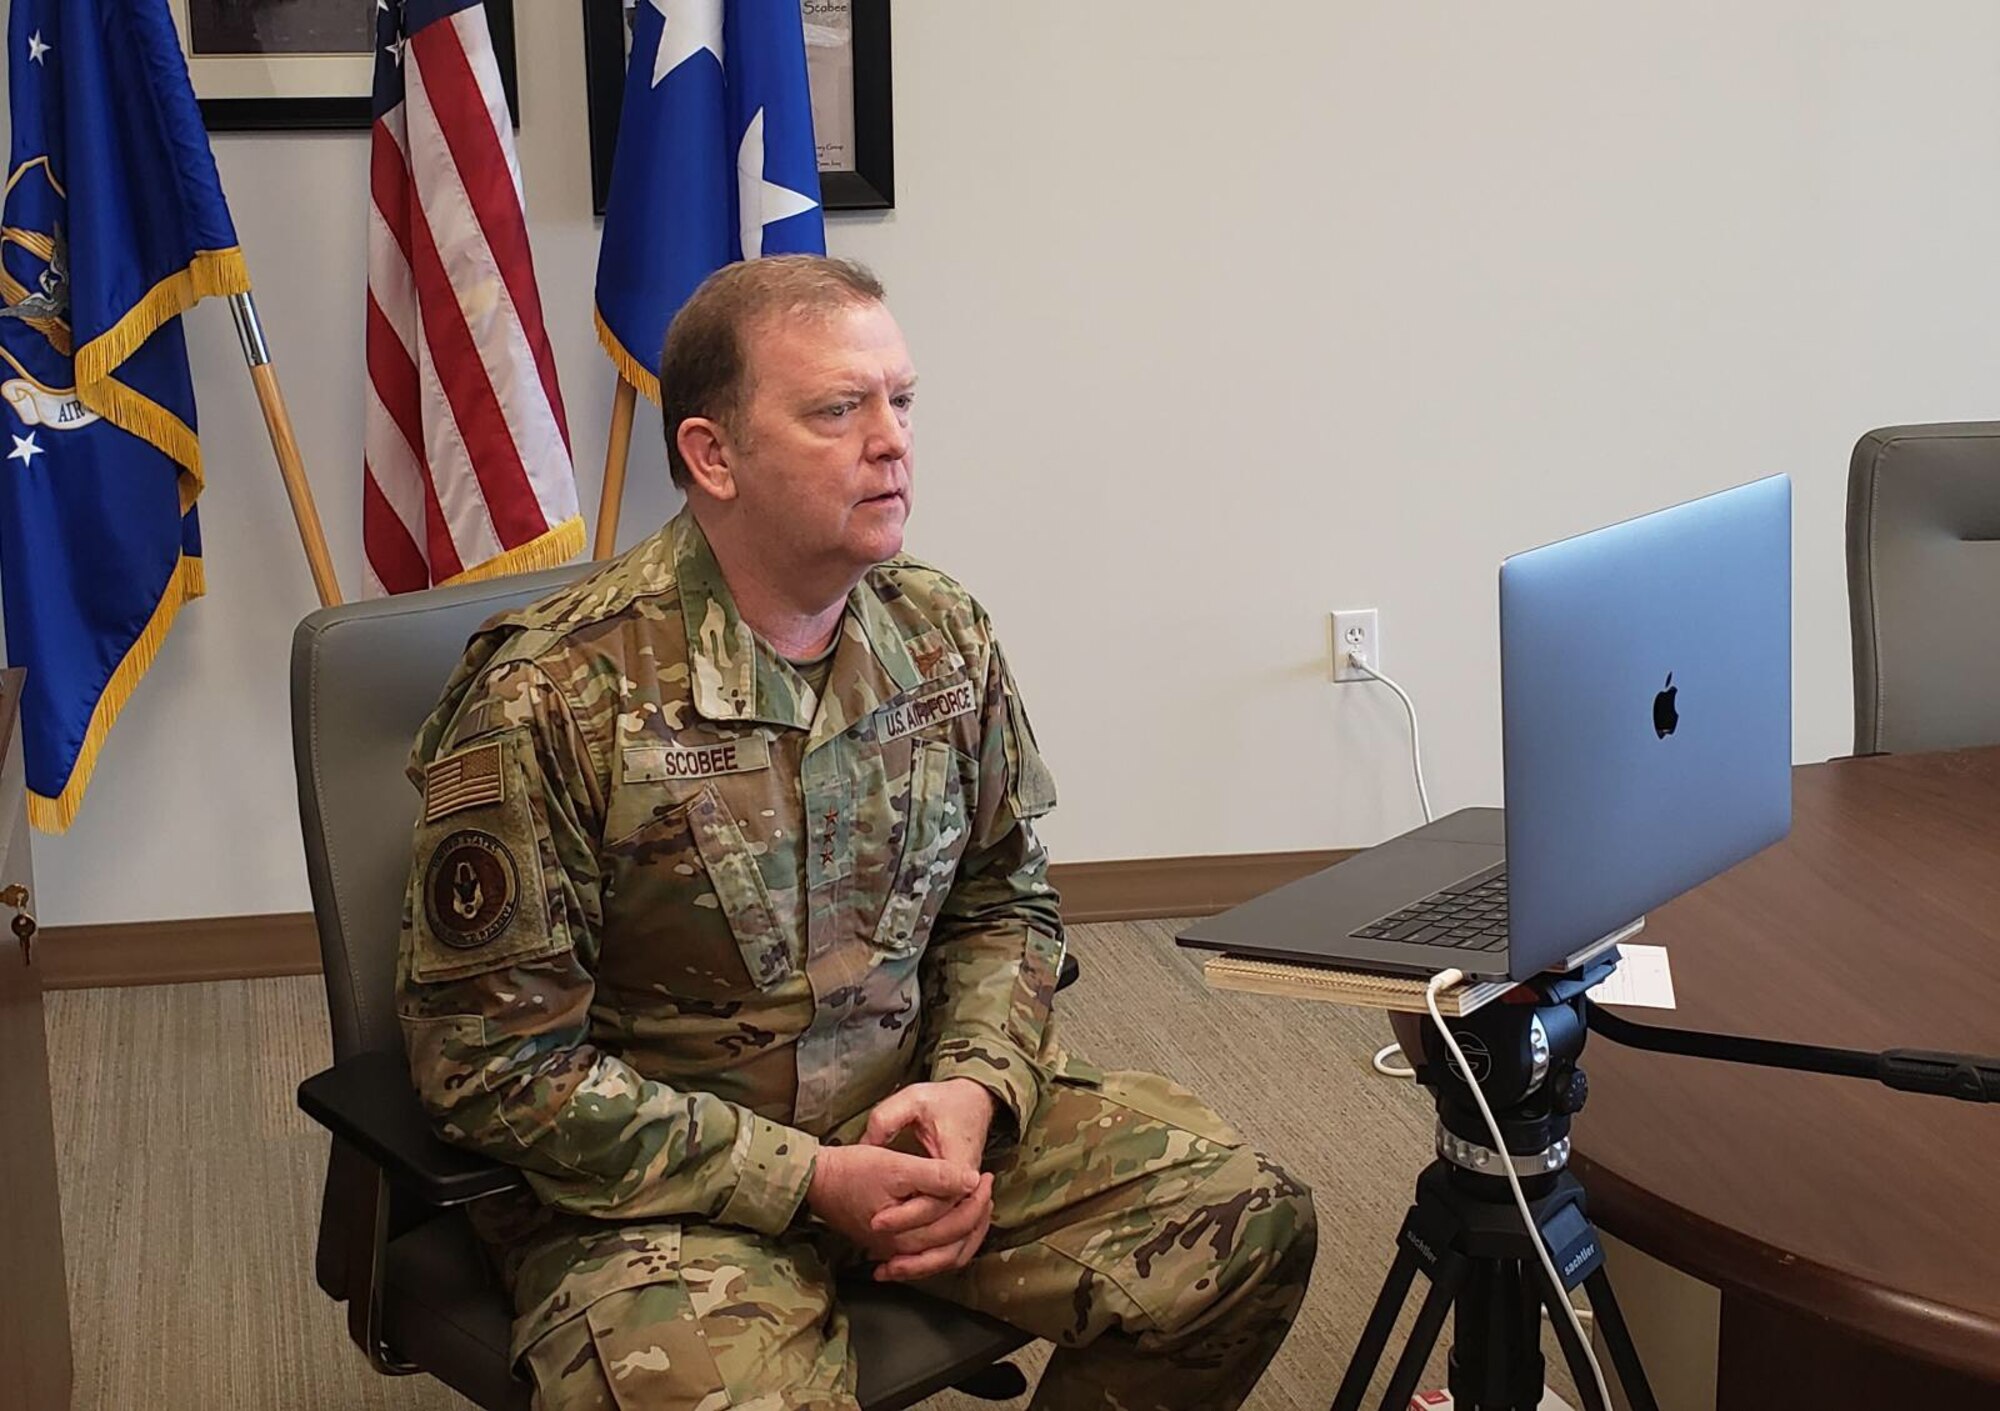 Lt. Gen. Richard Scobee conducts a FaceBook Live town hall meeting from his office to stay in touch with Reserve Citizen Airmen during this time of physical distancing. (Lt. Col. Jon Quinlan)